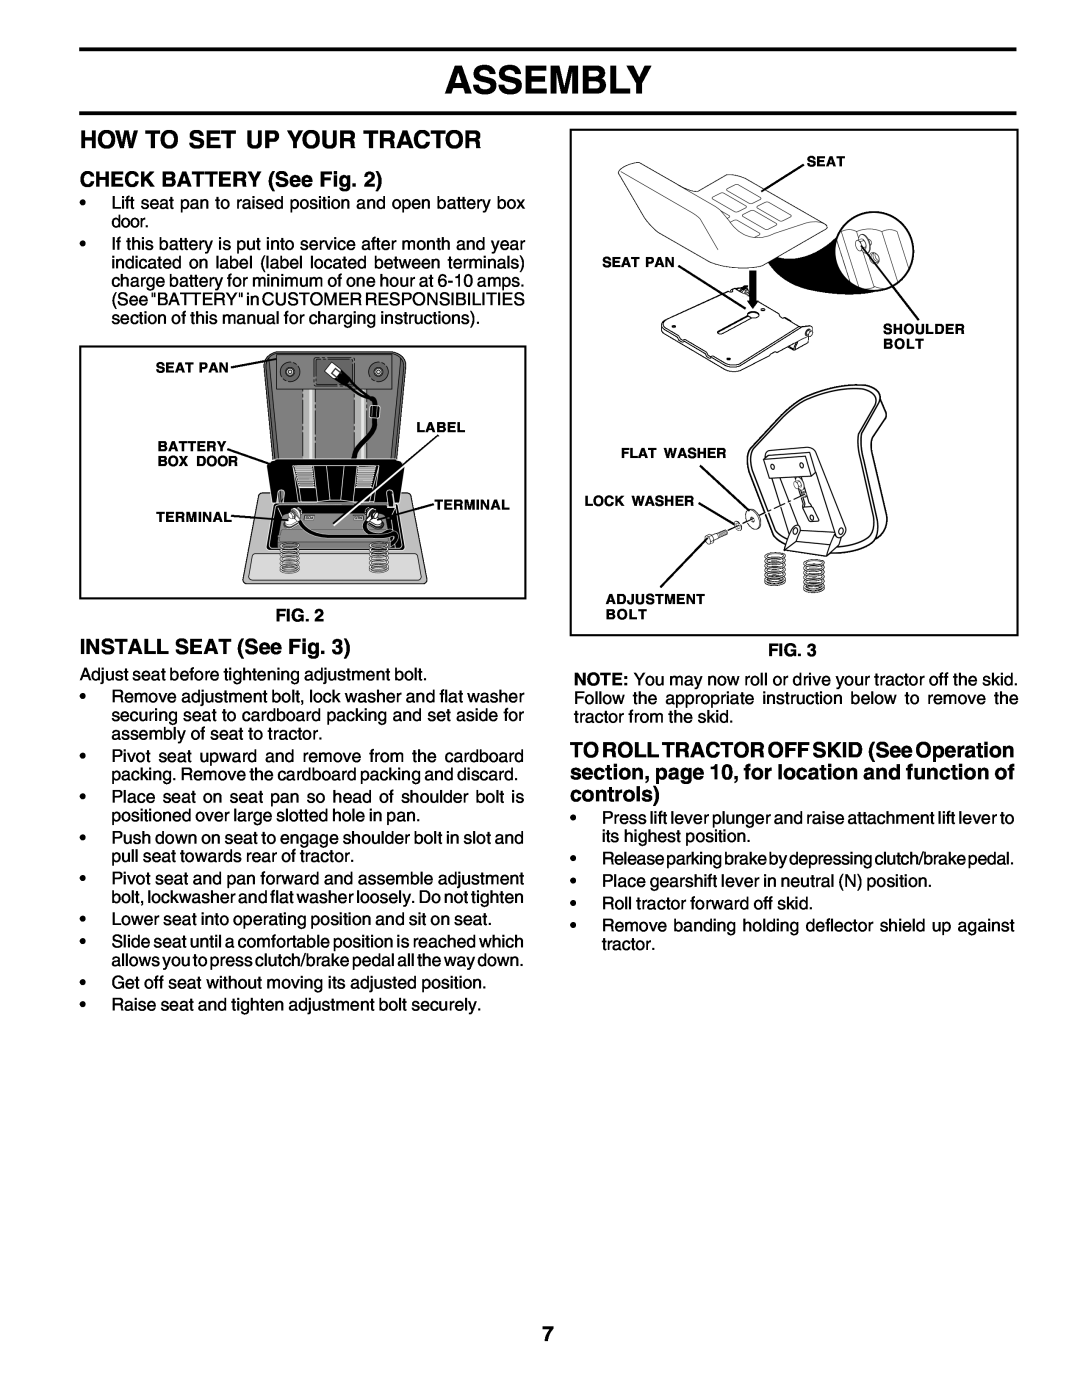 Poulan PO14542C manual How To Set Up Your Tractor, Assembly, CHECK BATTERY See Fig, INSTALL SEAT See Fig 